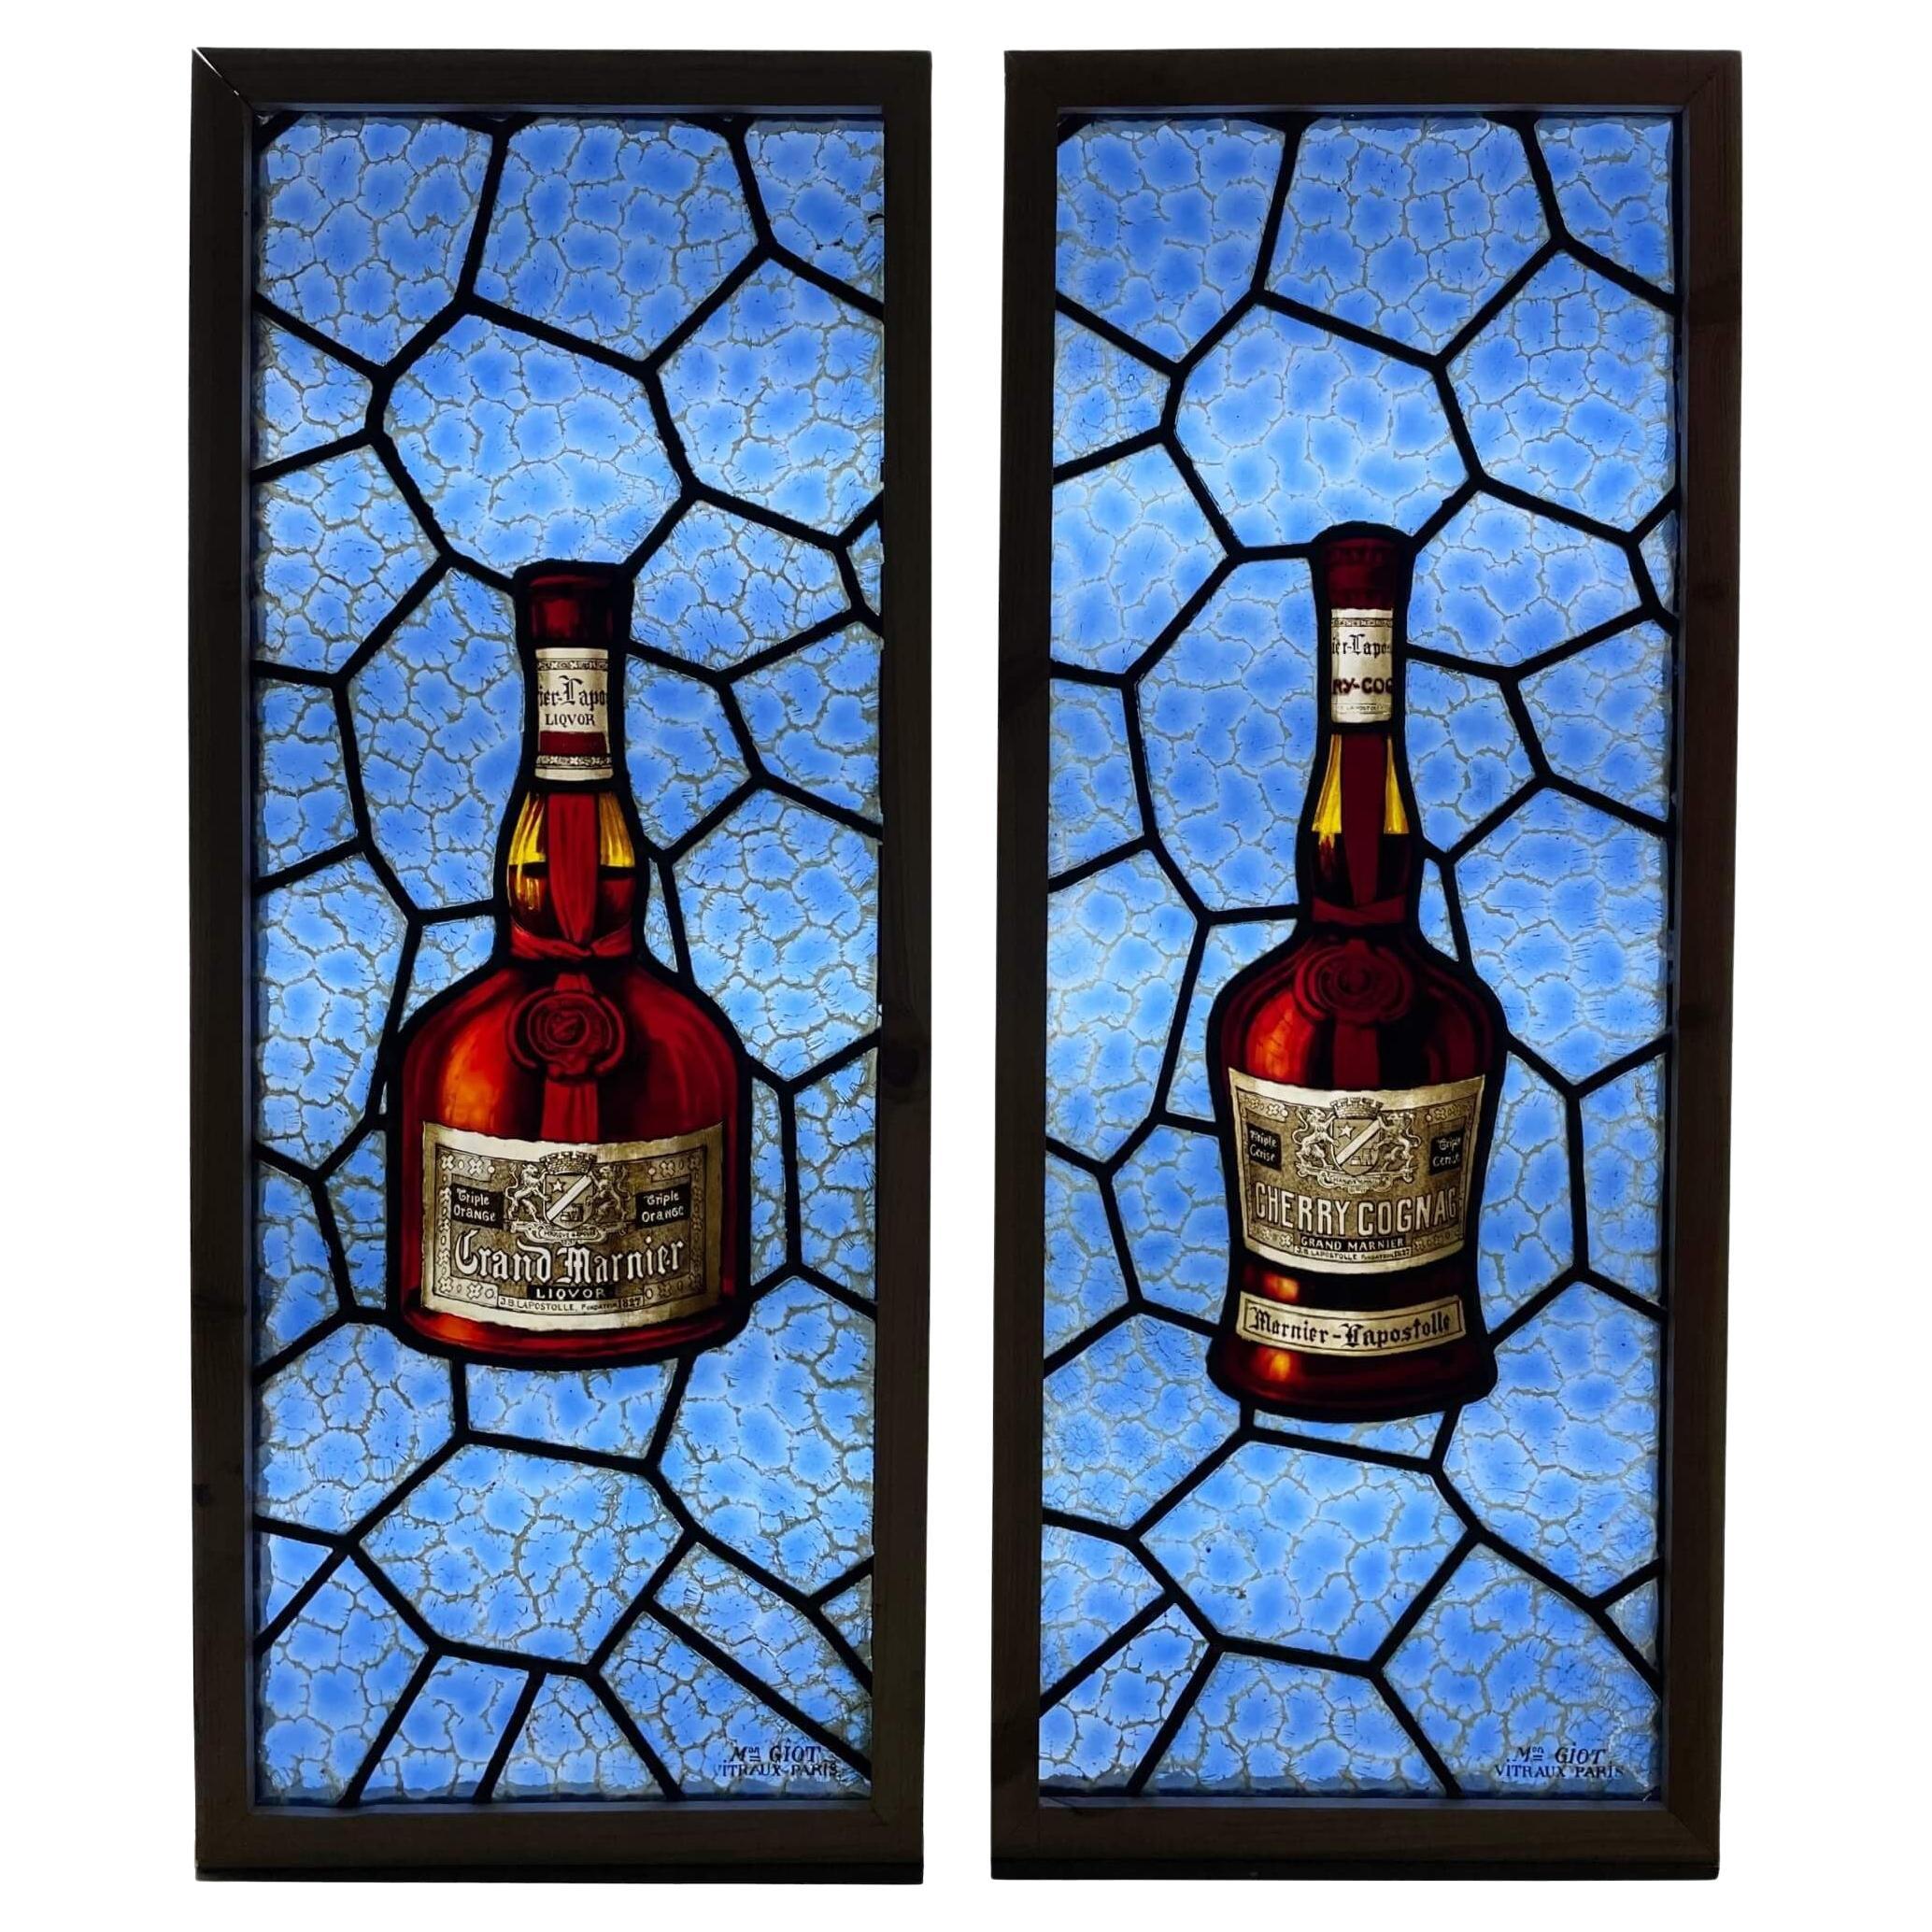 Pair of Antique Stained Glass Liquor Advertising Panels